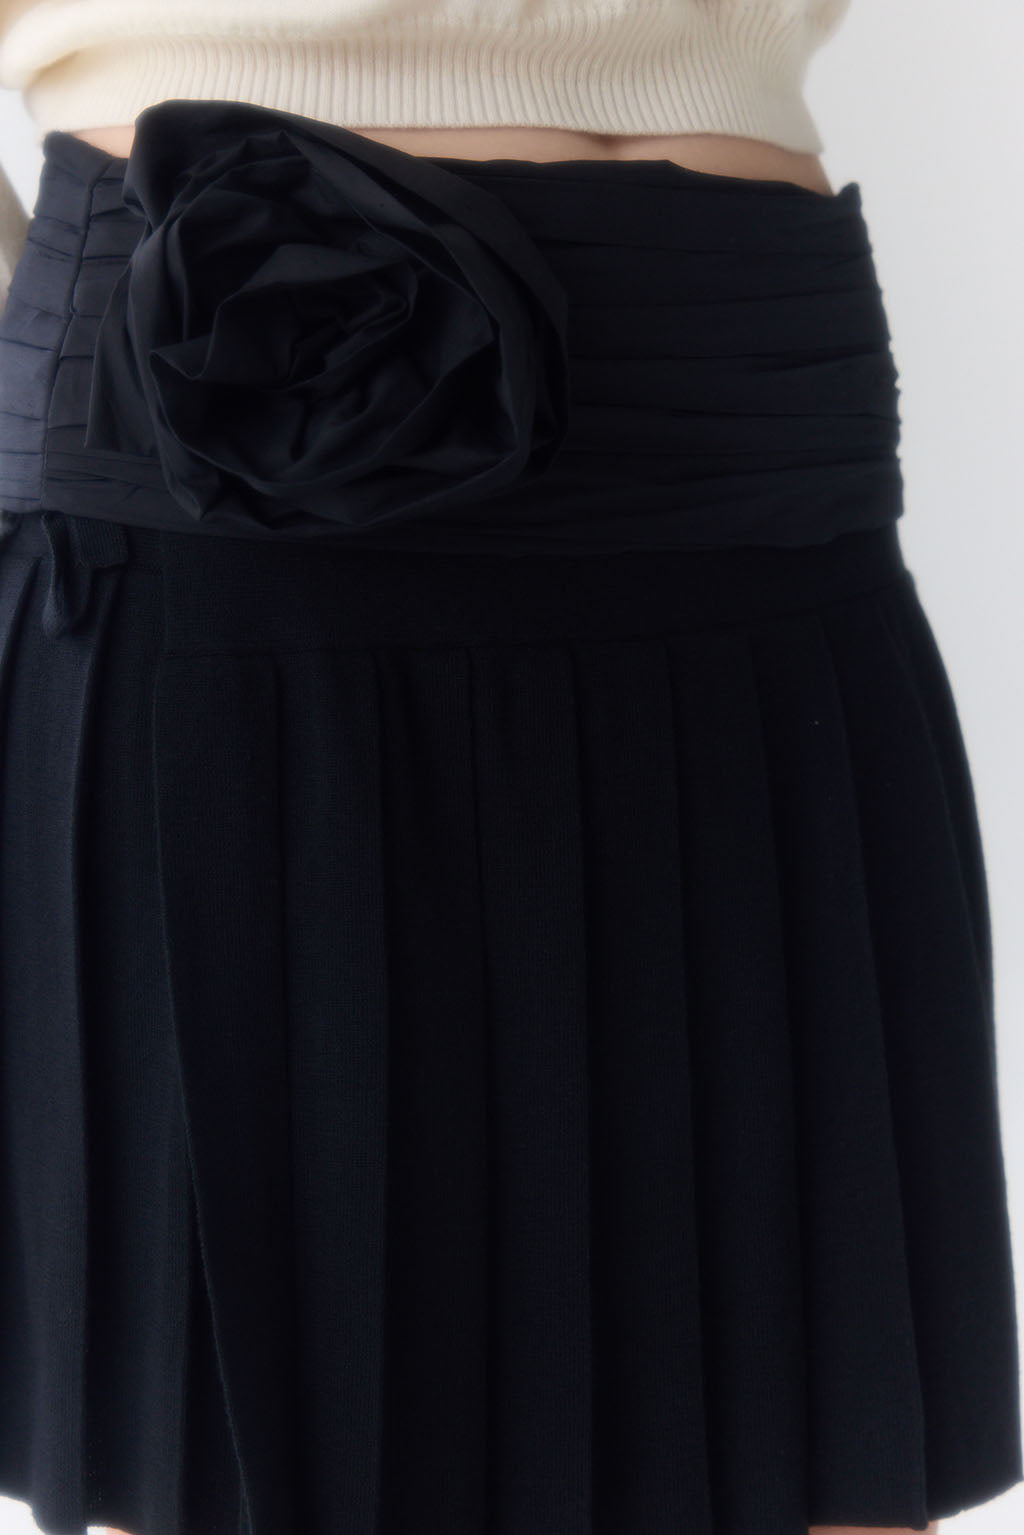 Muse The Label -  Knit Pleat Skirt - Black